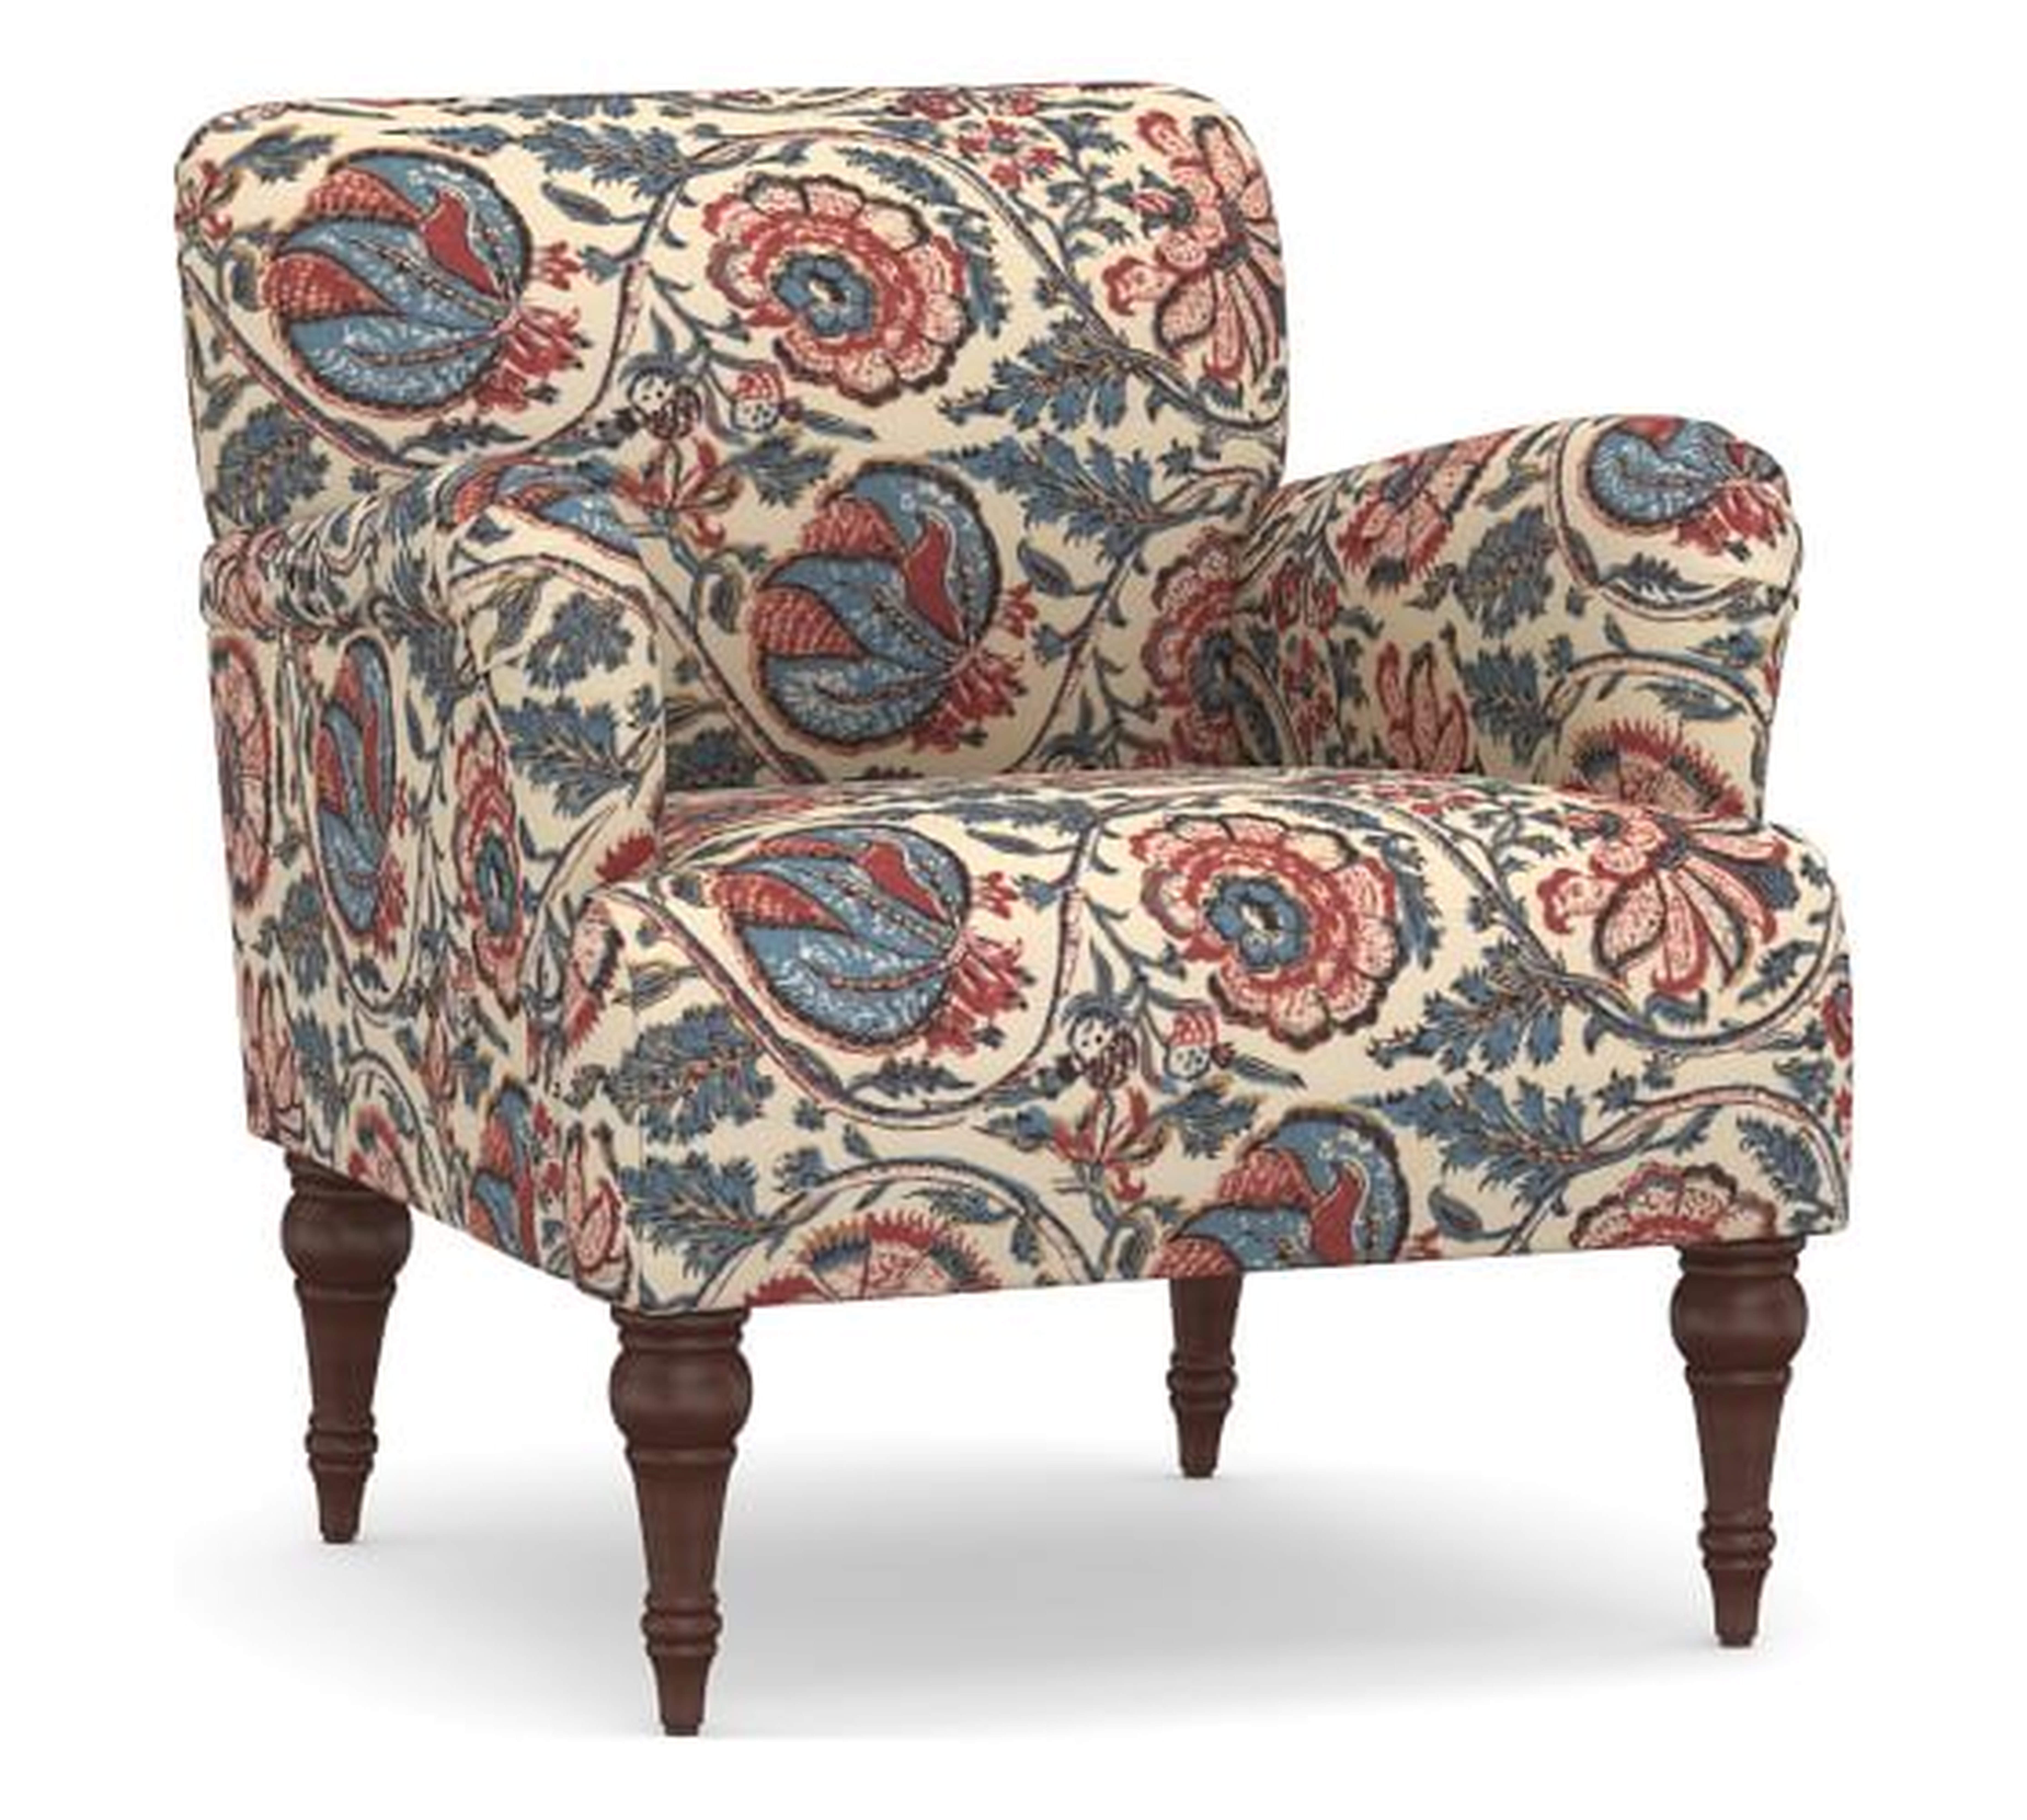 Hadley Upholstered Armchair, Haylie Red - Pottery Barn